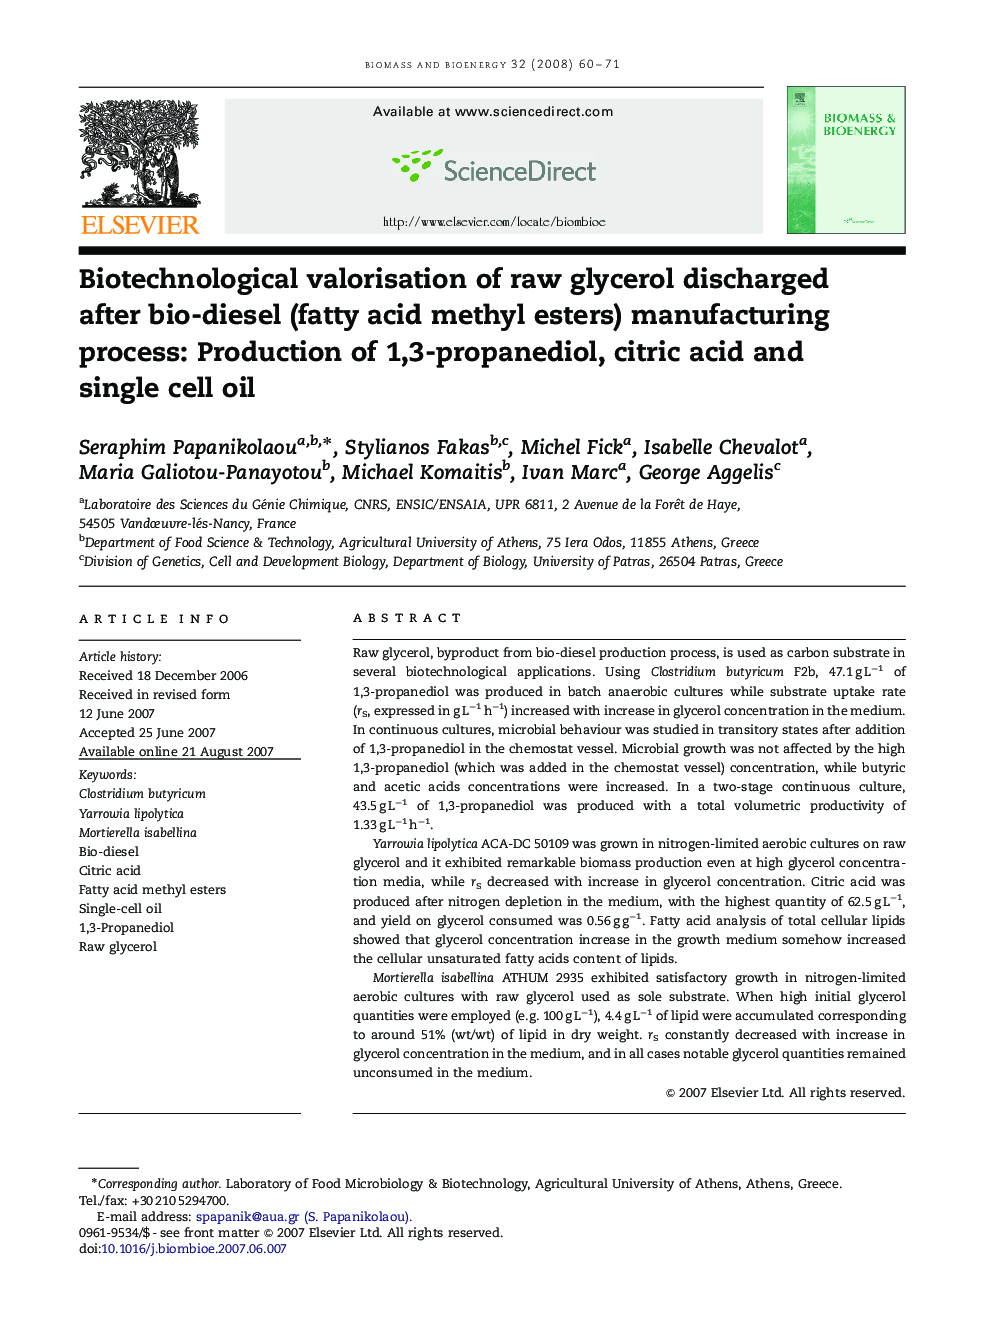 Biotechnological valorisation of raw glycerol discharged after bio-diesel (fatty acid methyl esters) manufacturing process: Production of 1,3-propanediol, citric acid and single cell oil